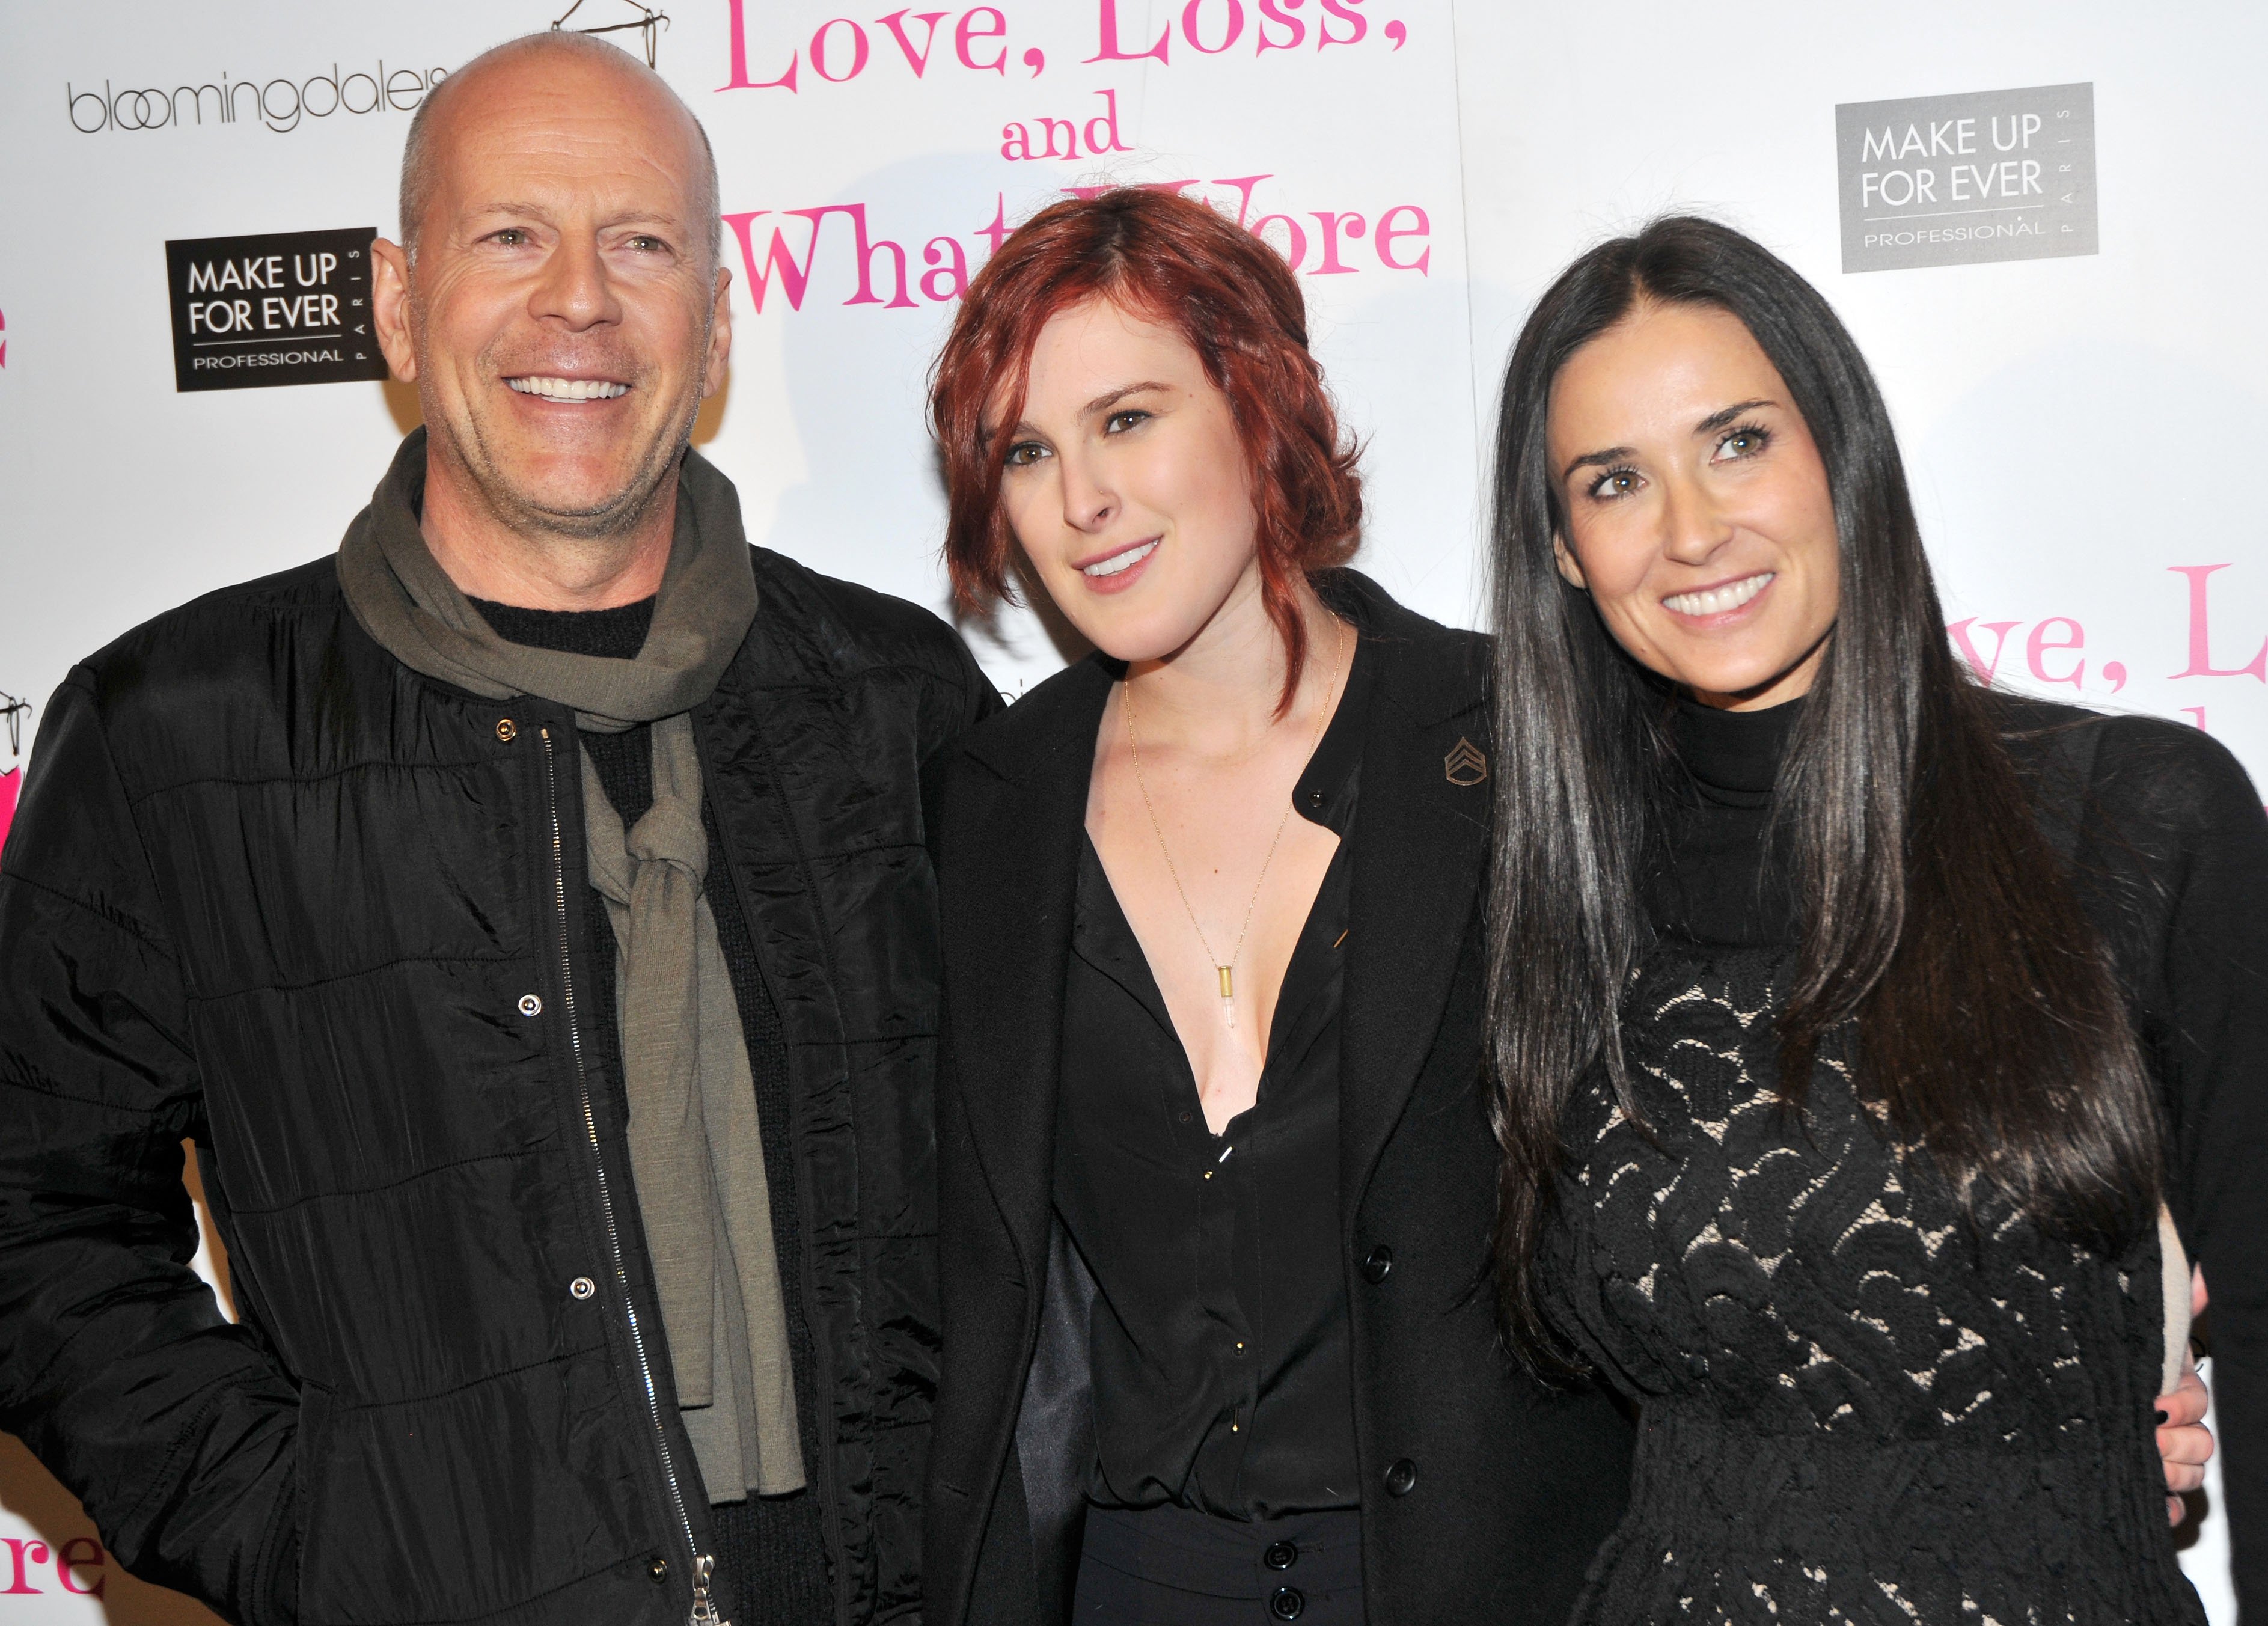 Bruce Willis, daughter Rumer Willis and Demi Moore pose at the "Love, Loss & What I Wore" new cast member celebration at B Smith's Restaurant on March 24, 2011 in New York City | Source: Getty Images